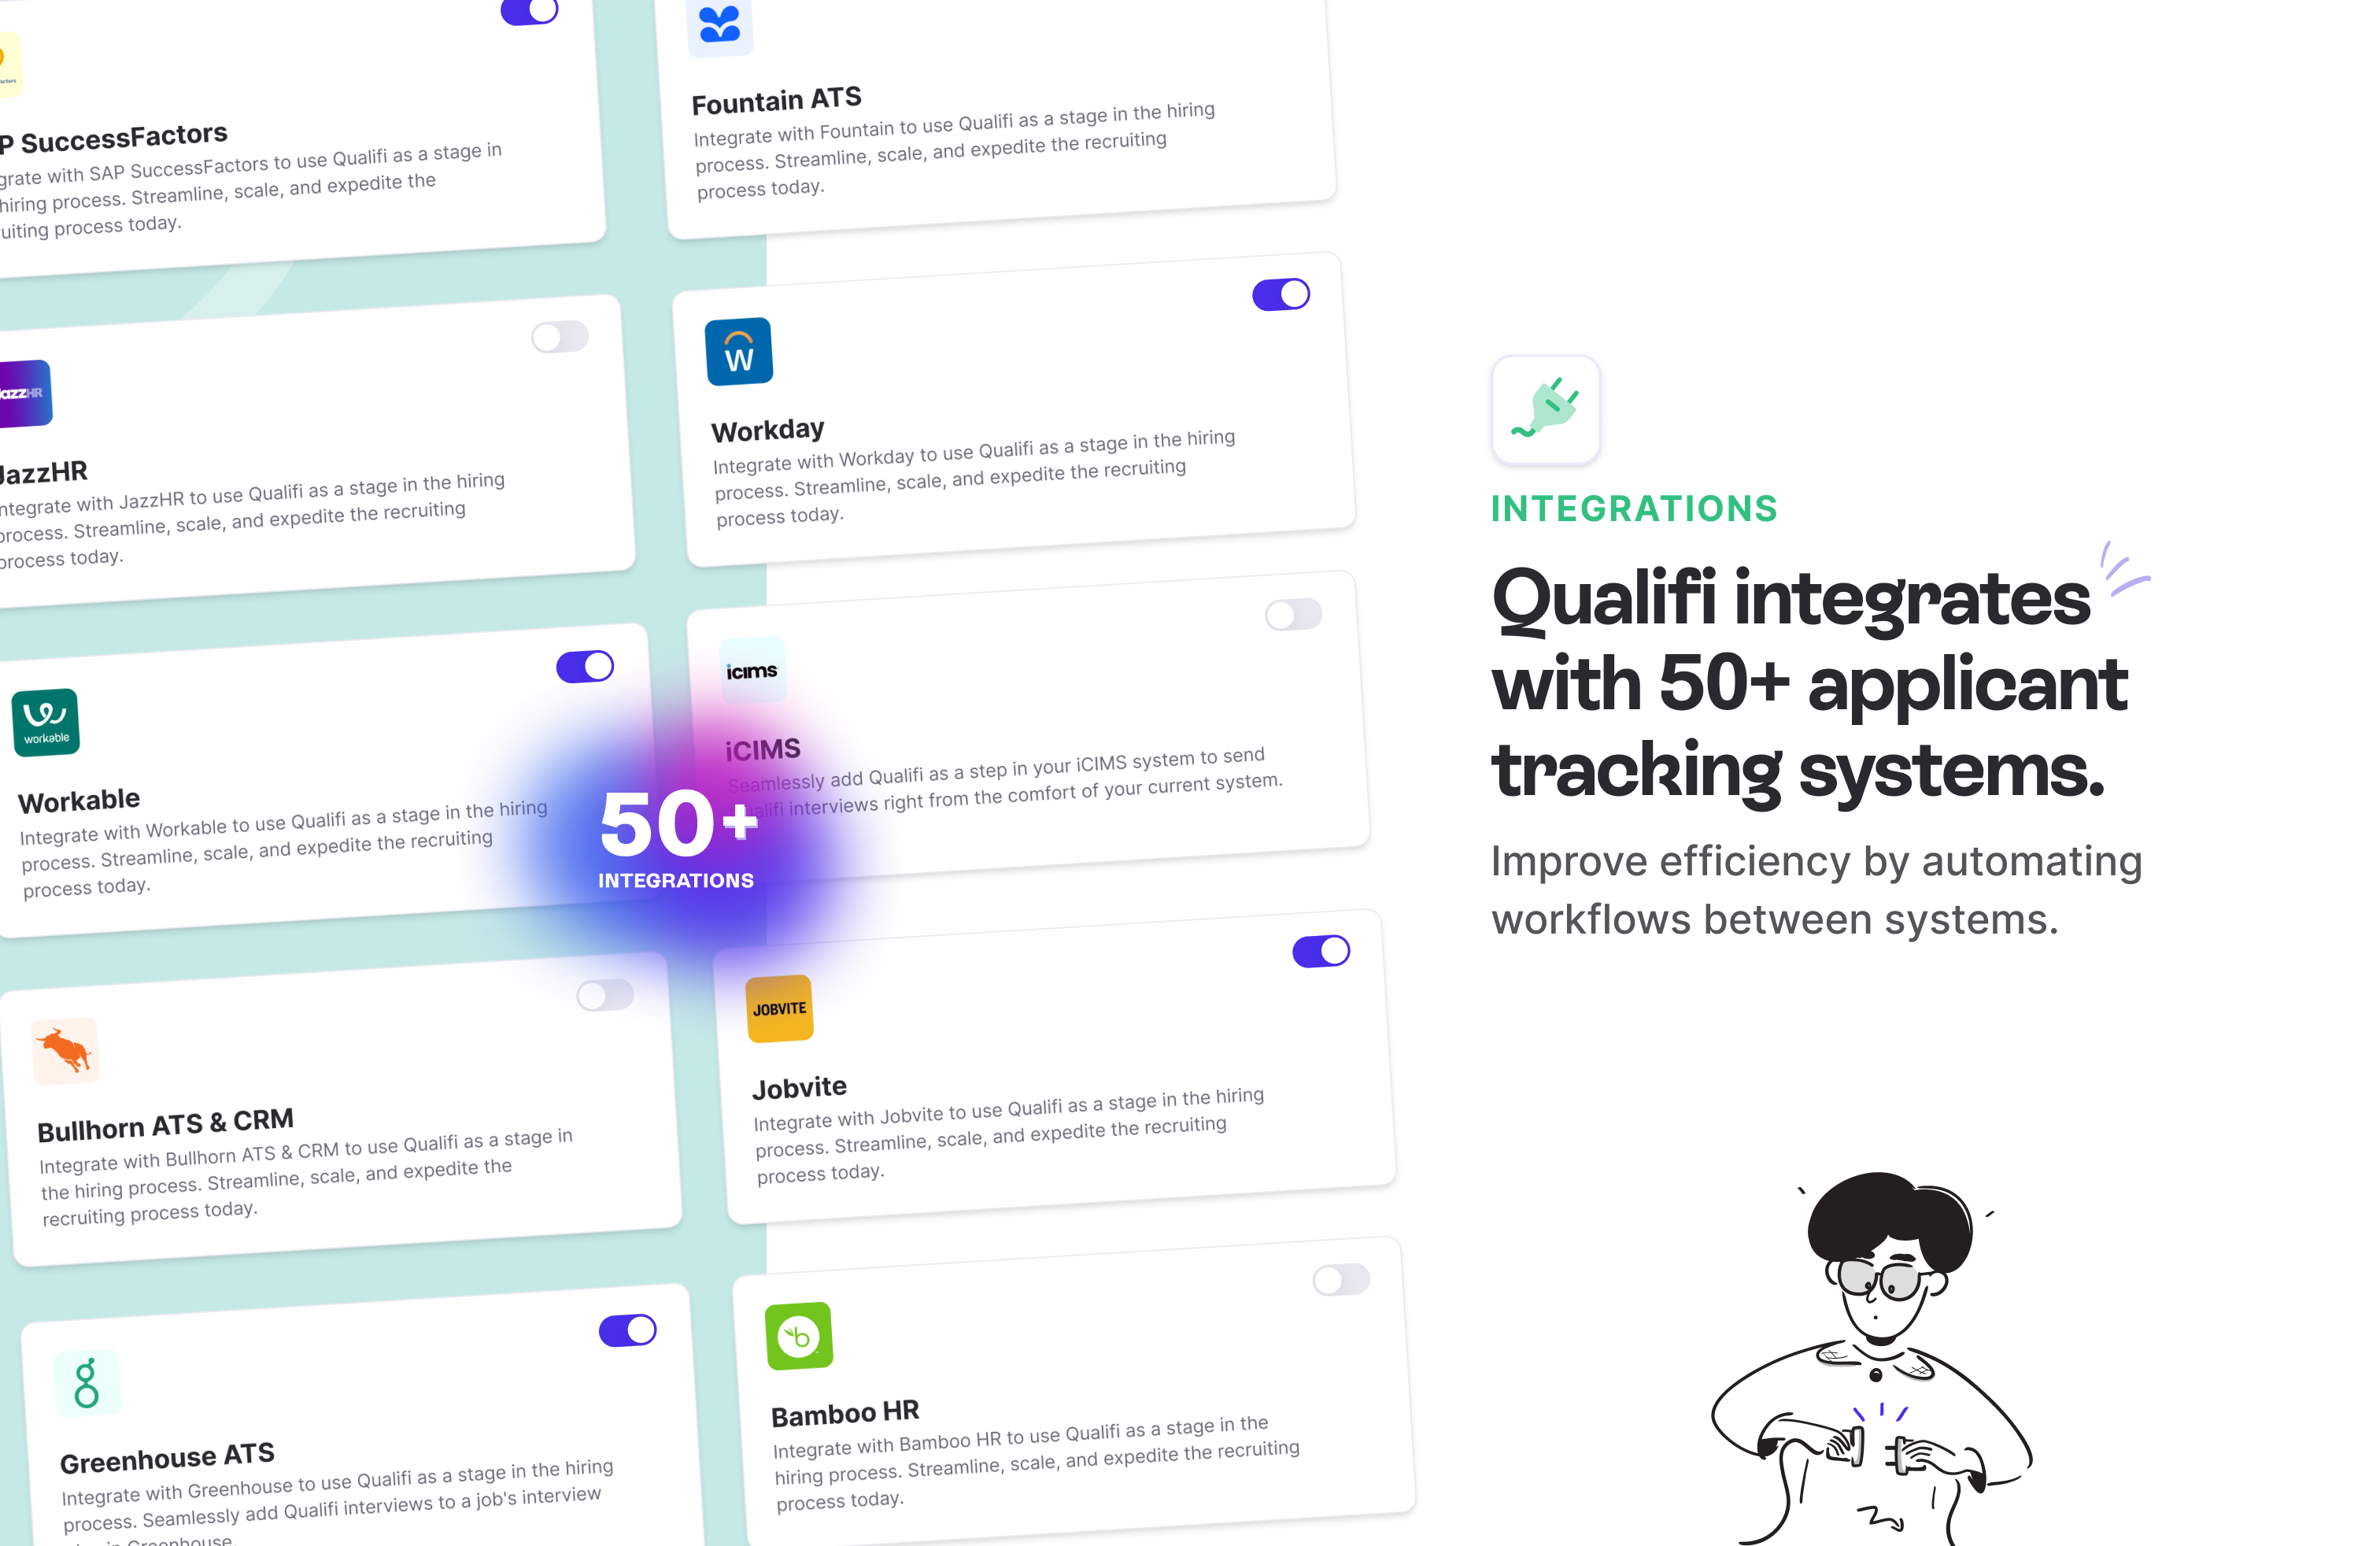 Qualifi integrates with 50+ applicant tracking systems.